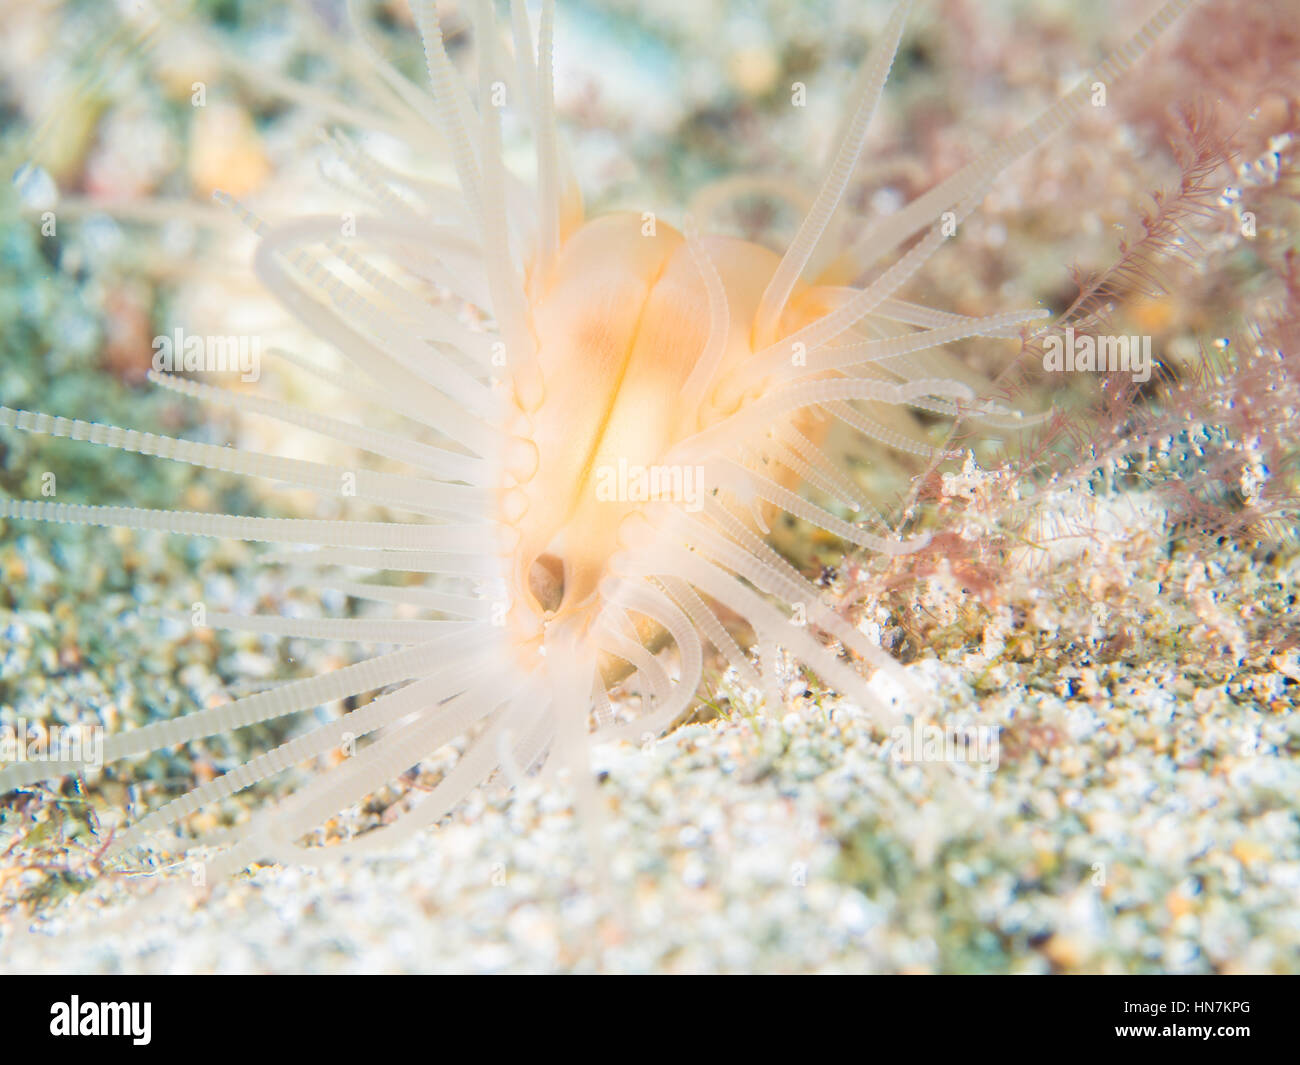 Flame scallop shell - Stock Image - C029/8380 - Science Photo Library